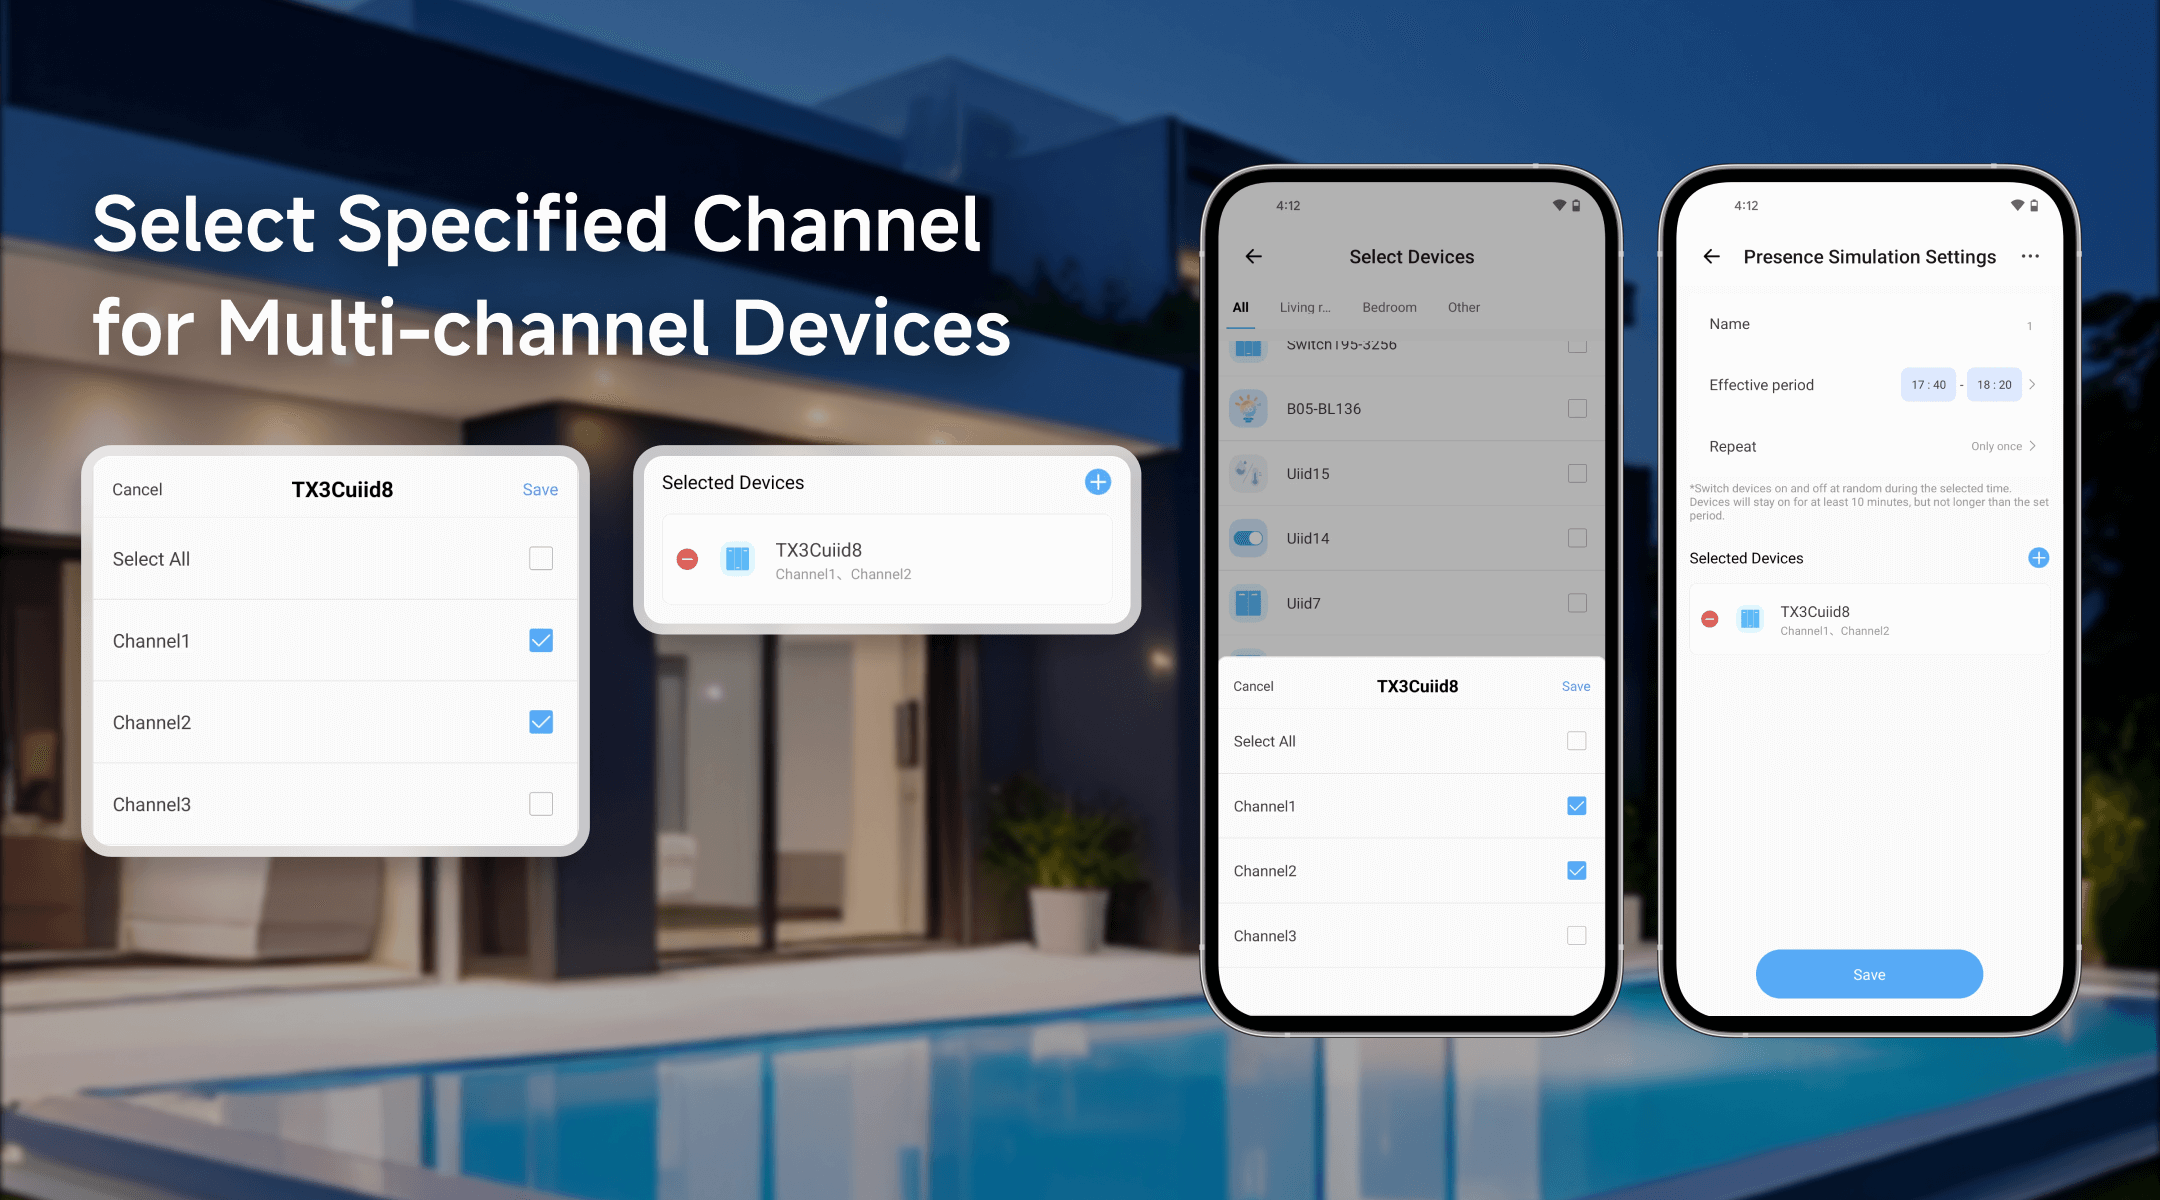 Select Specified Channel for Multi-Channel Devices in Presence Simulation